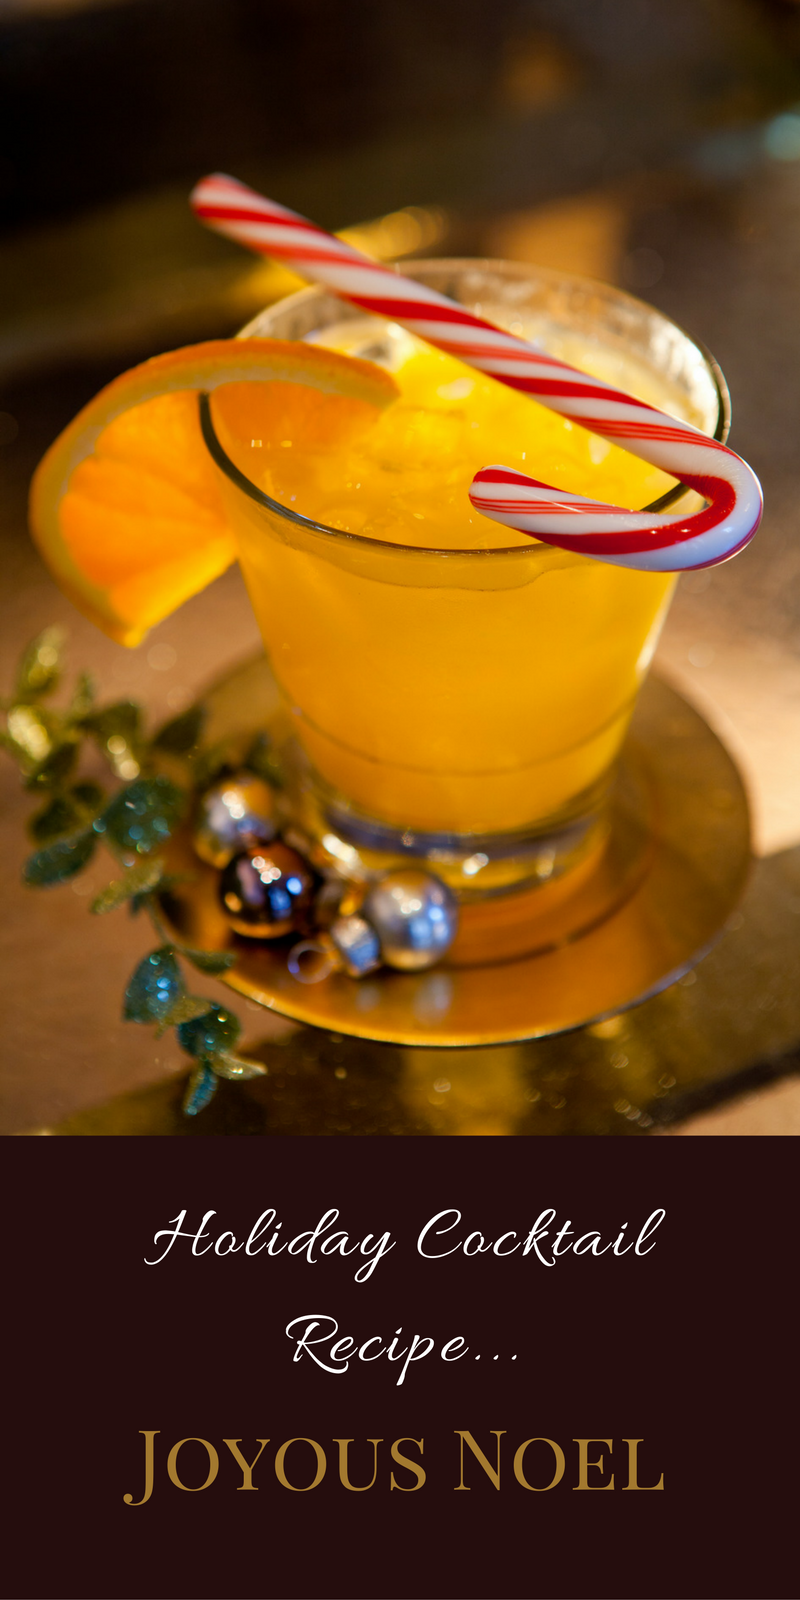 Learn how to make this year's favorite holiday cocktails, including the Joyous Noel, with these easy and festive recipes from the Carousel Bar.